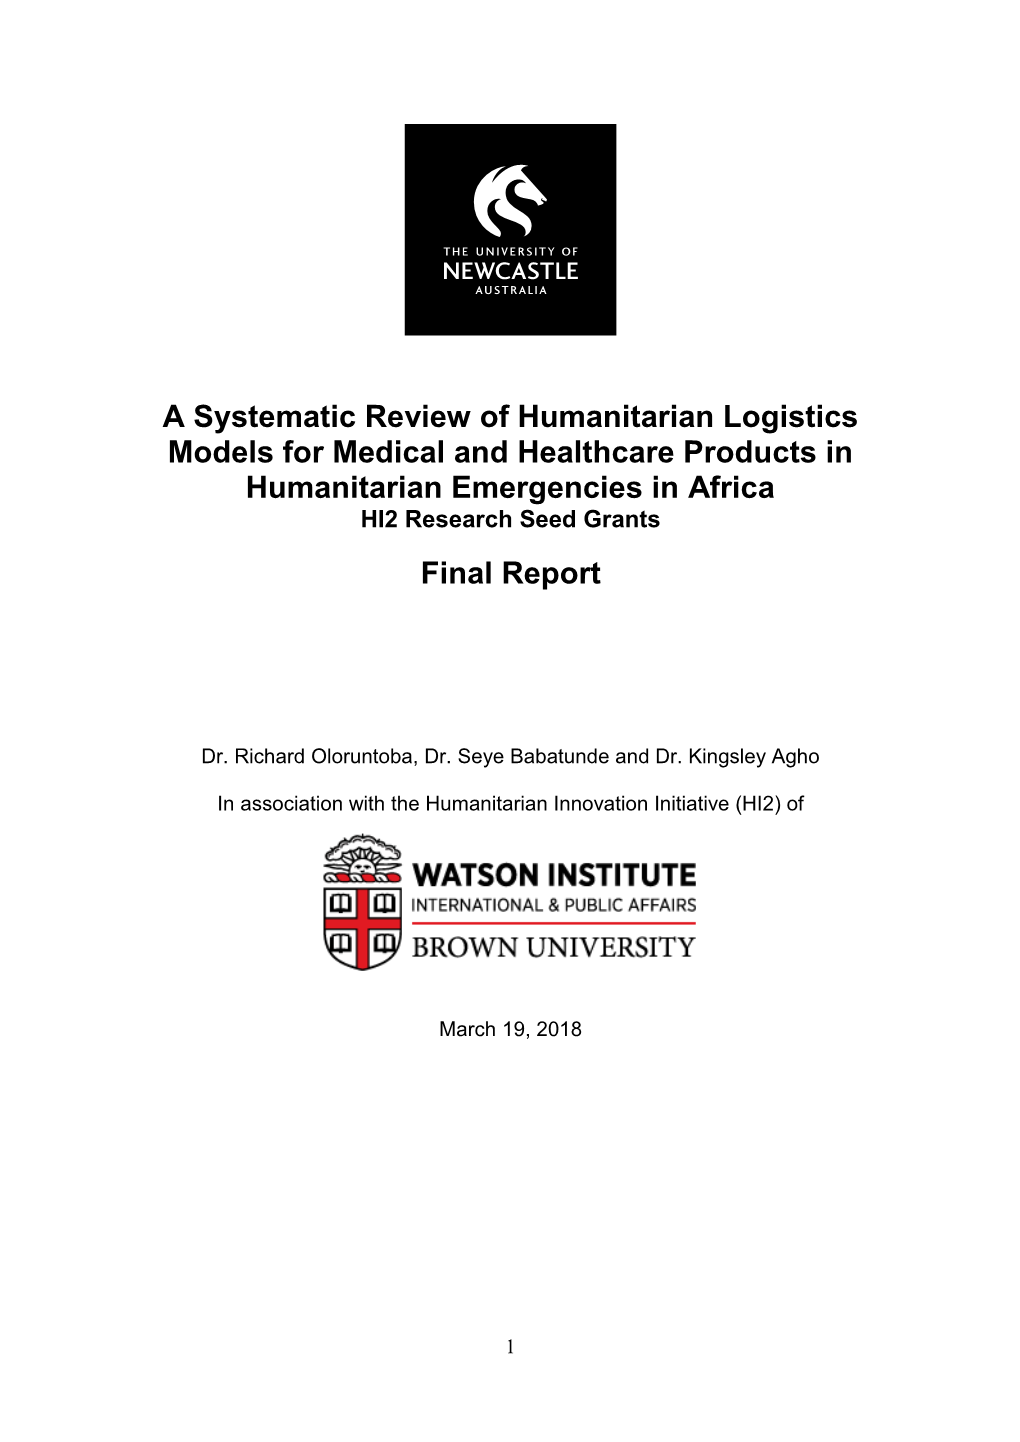 A Systematic Review of Humanitarian Logistics Models for Medical and Healthcare Products in Humanitarian Emergencies in Africa F